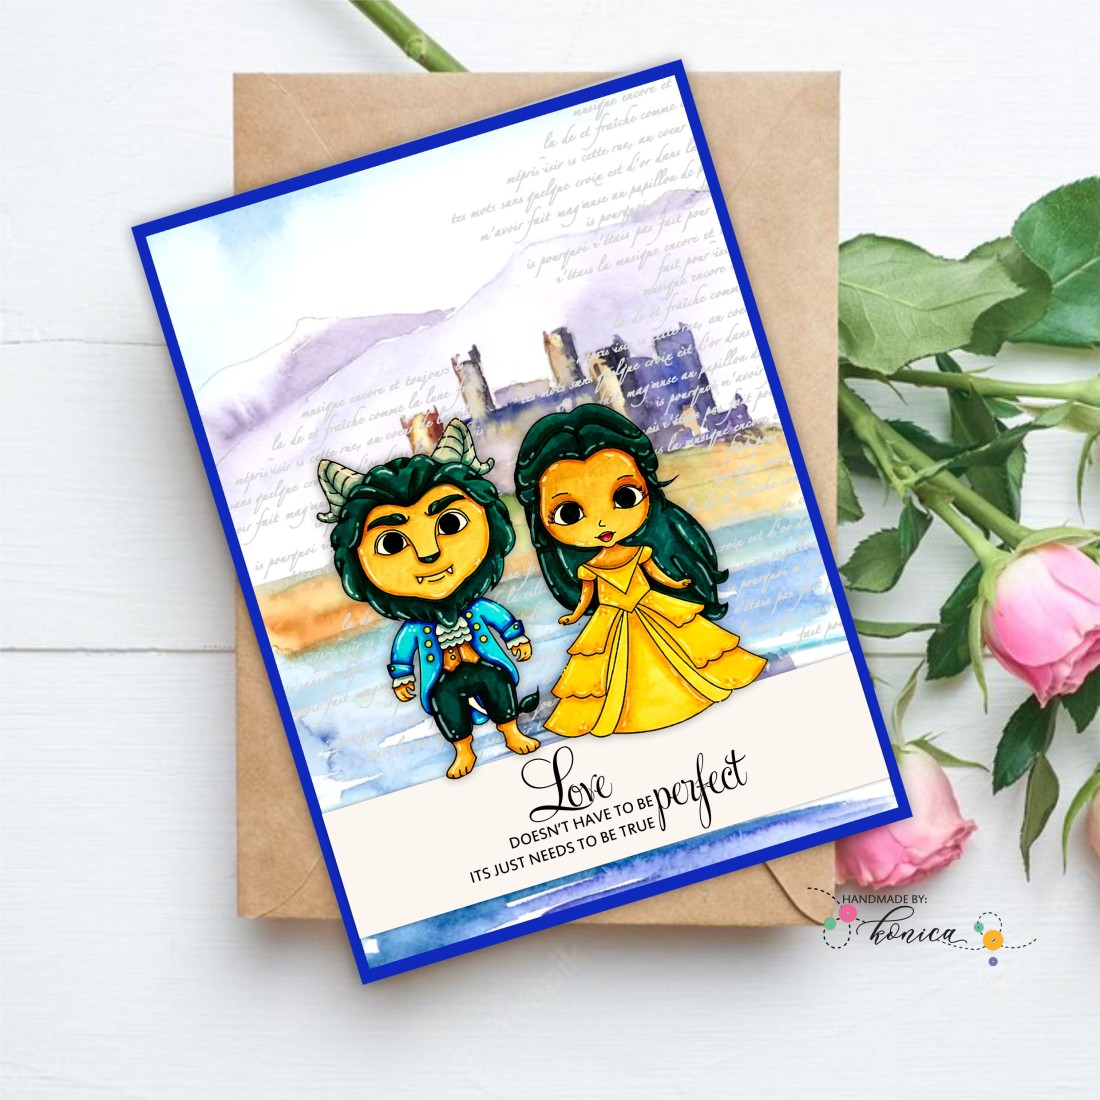 Craftyscrappers Stamps- PRINCESS BELLE